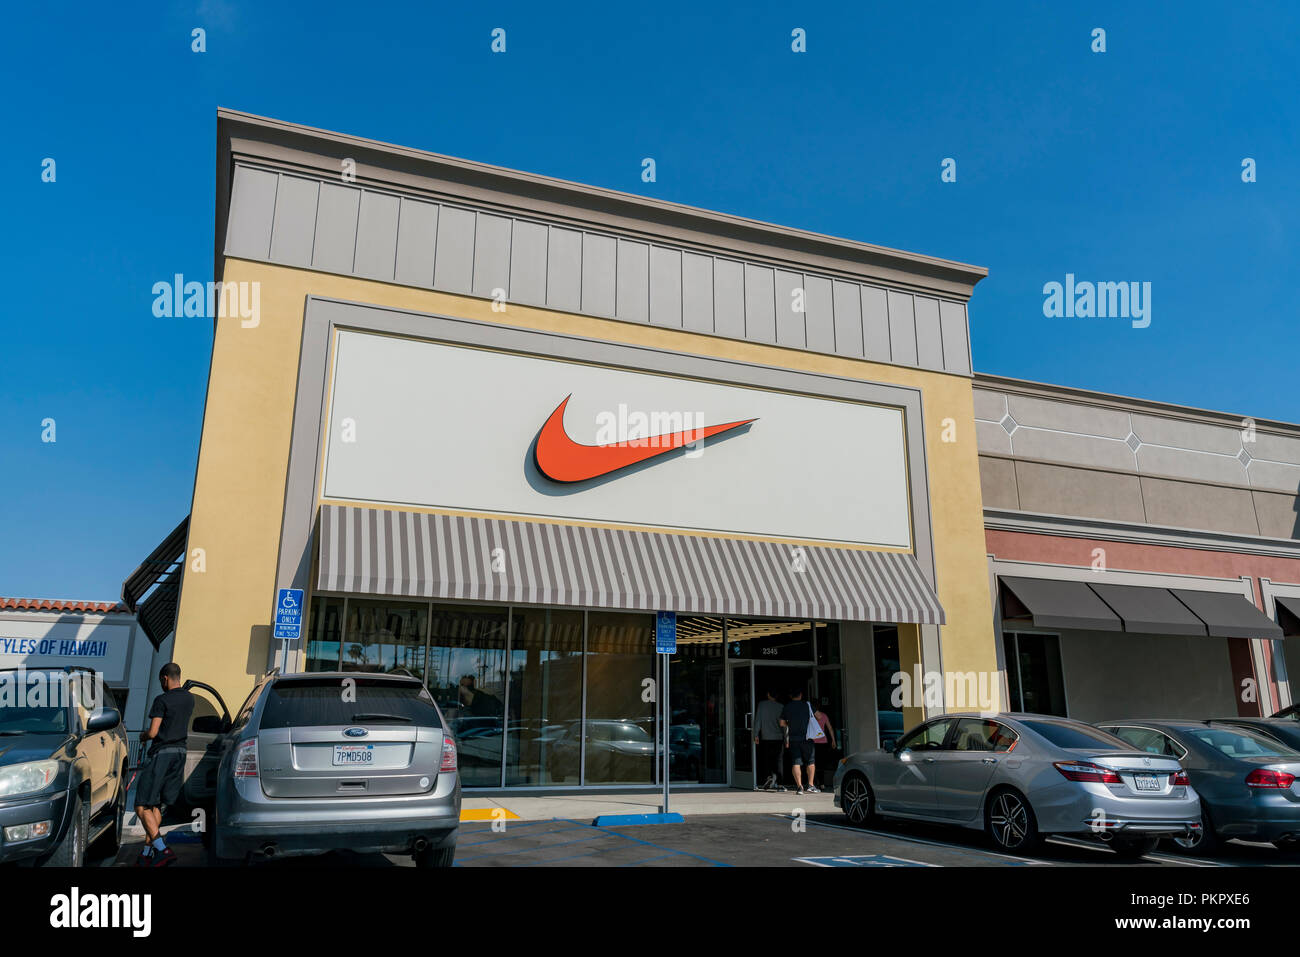 Los Angeles, JUL 15: Big Nike sign of a store on JUL 15, 2018 at Los Angeles,  California Stock Photo - Alamy